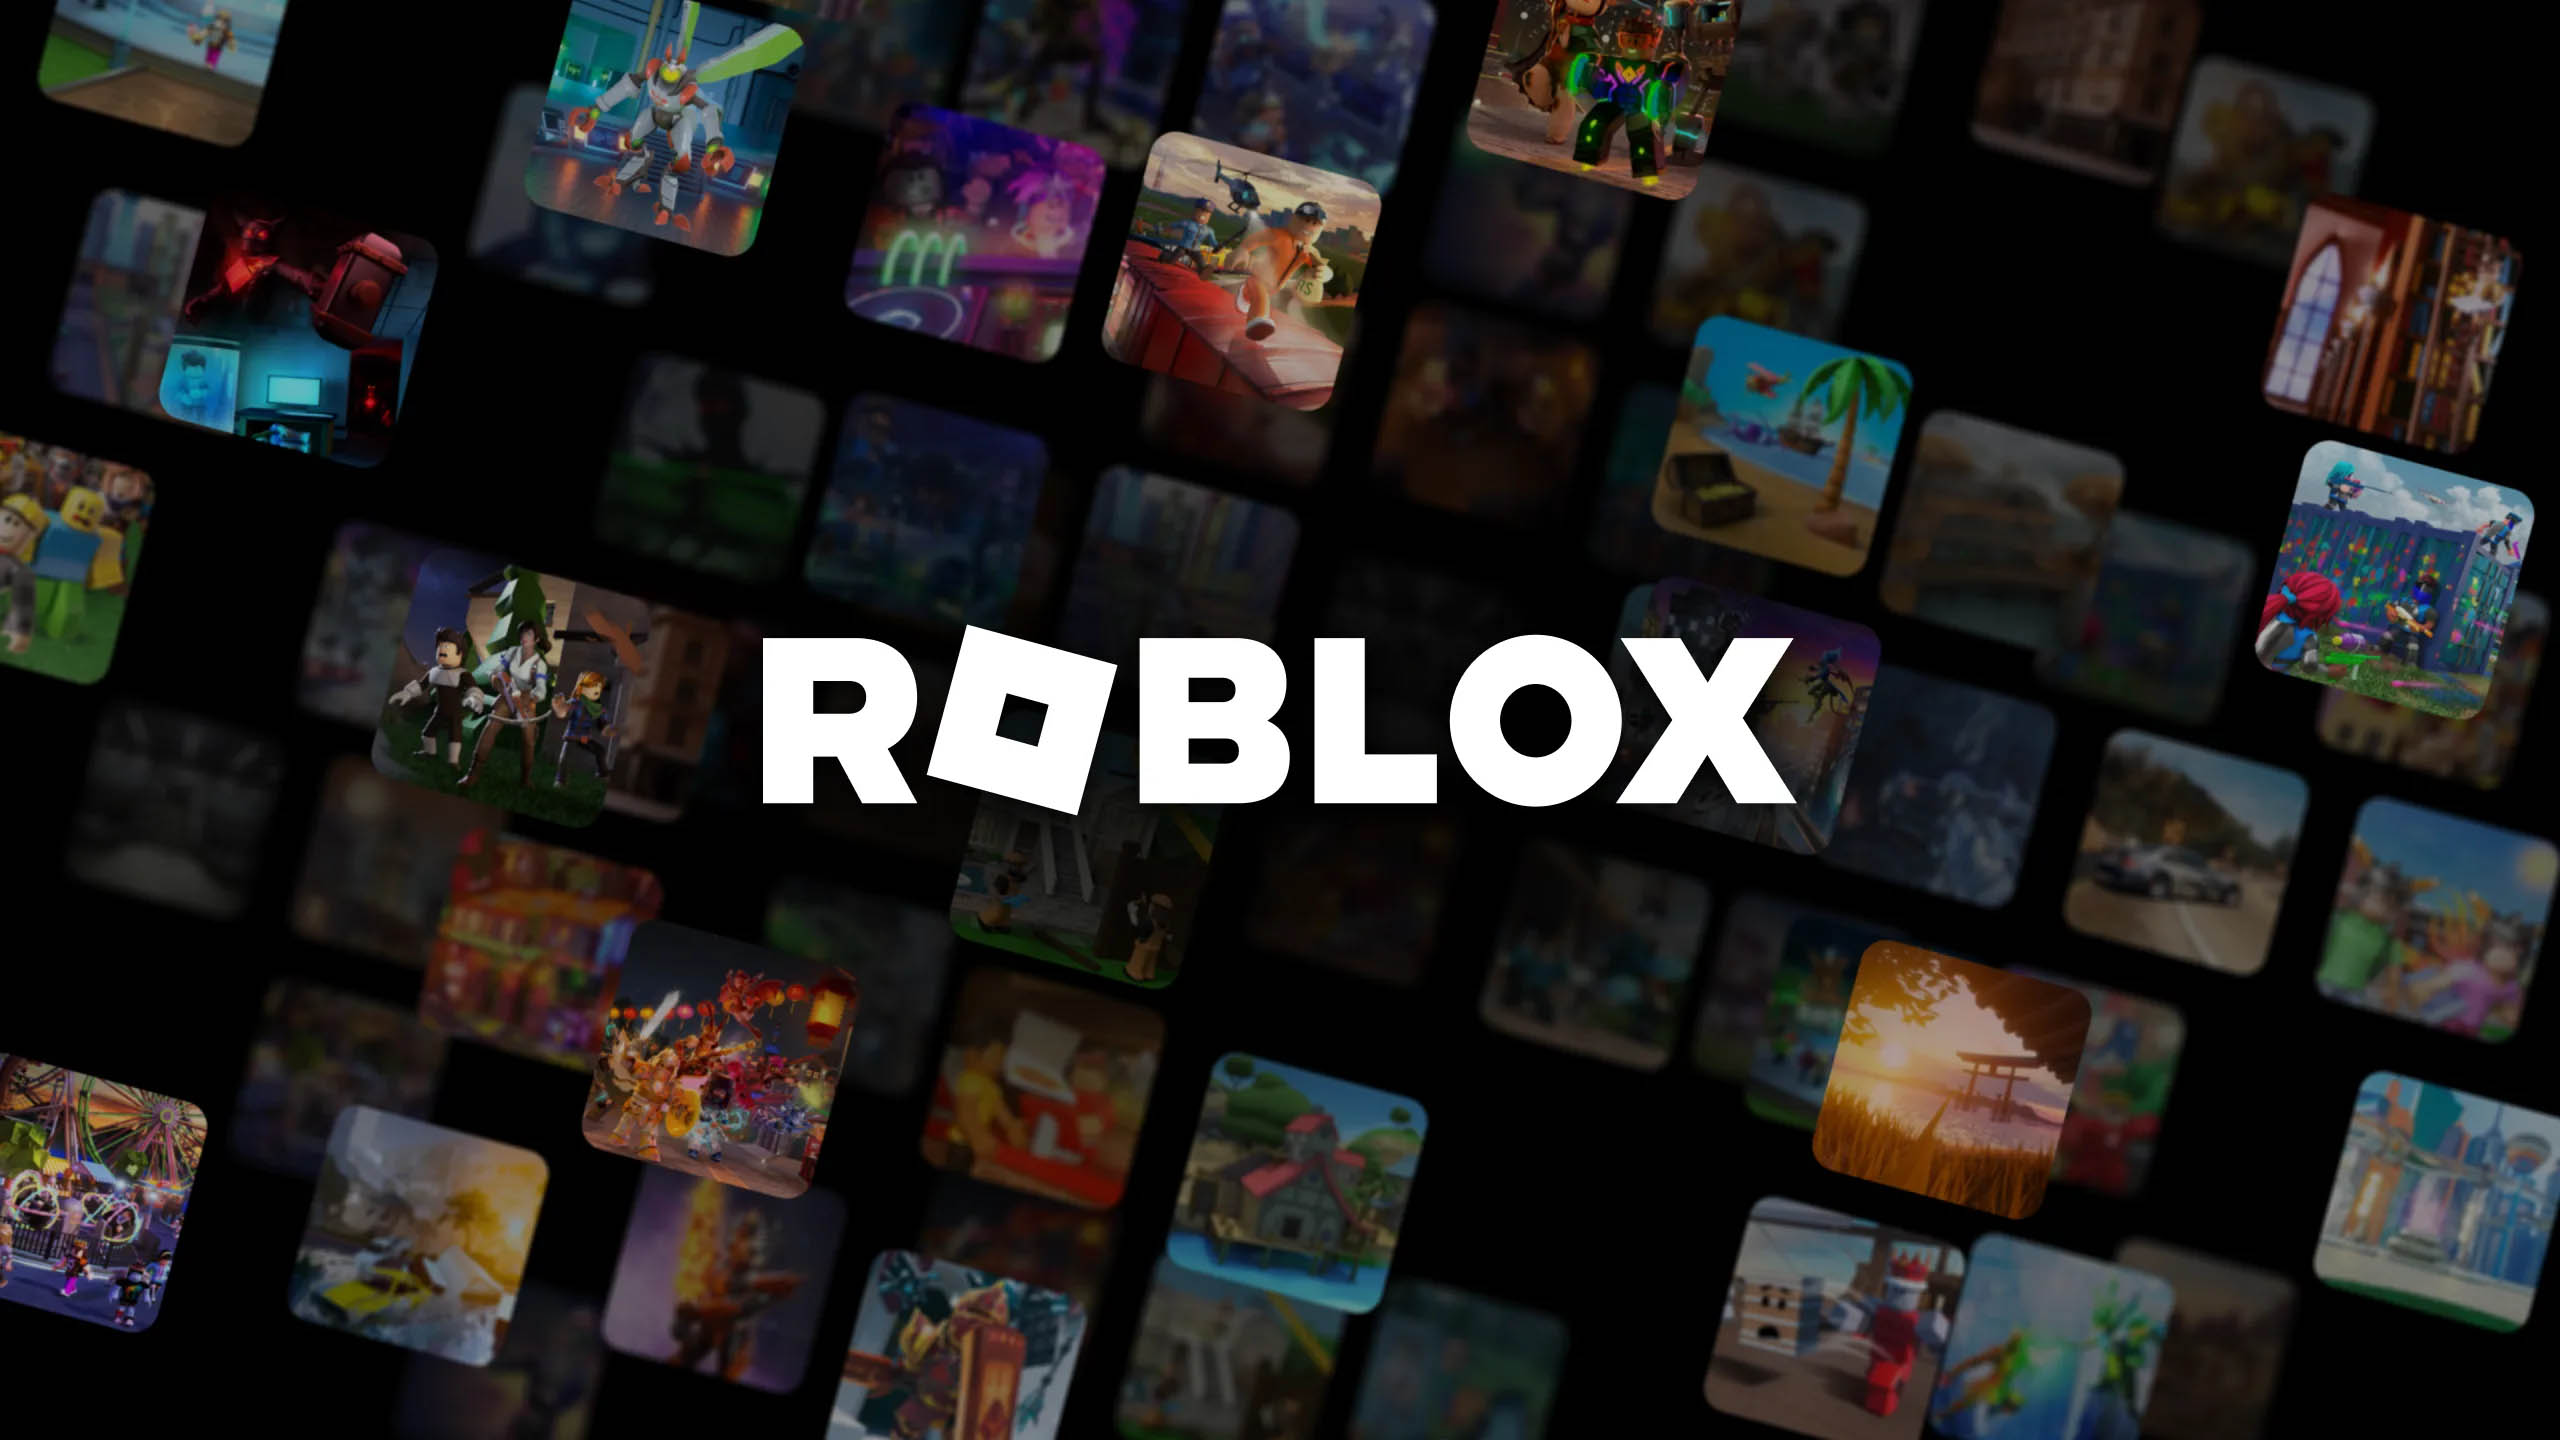 Roblox launches for PlayStation consoles in October